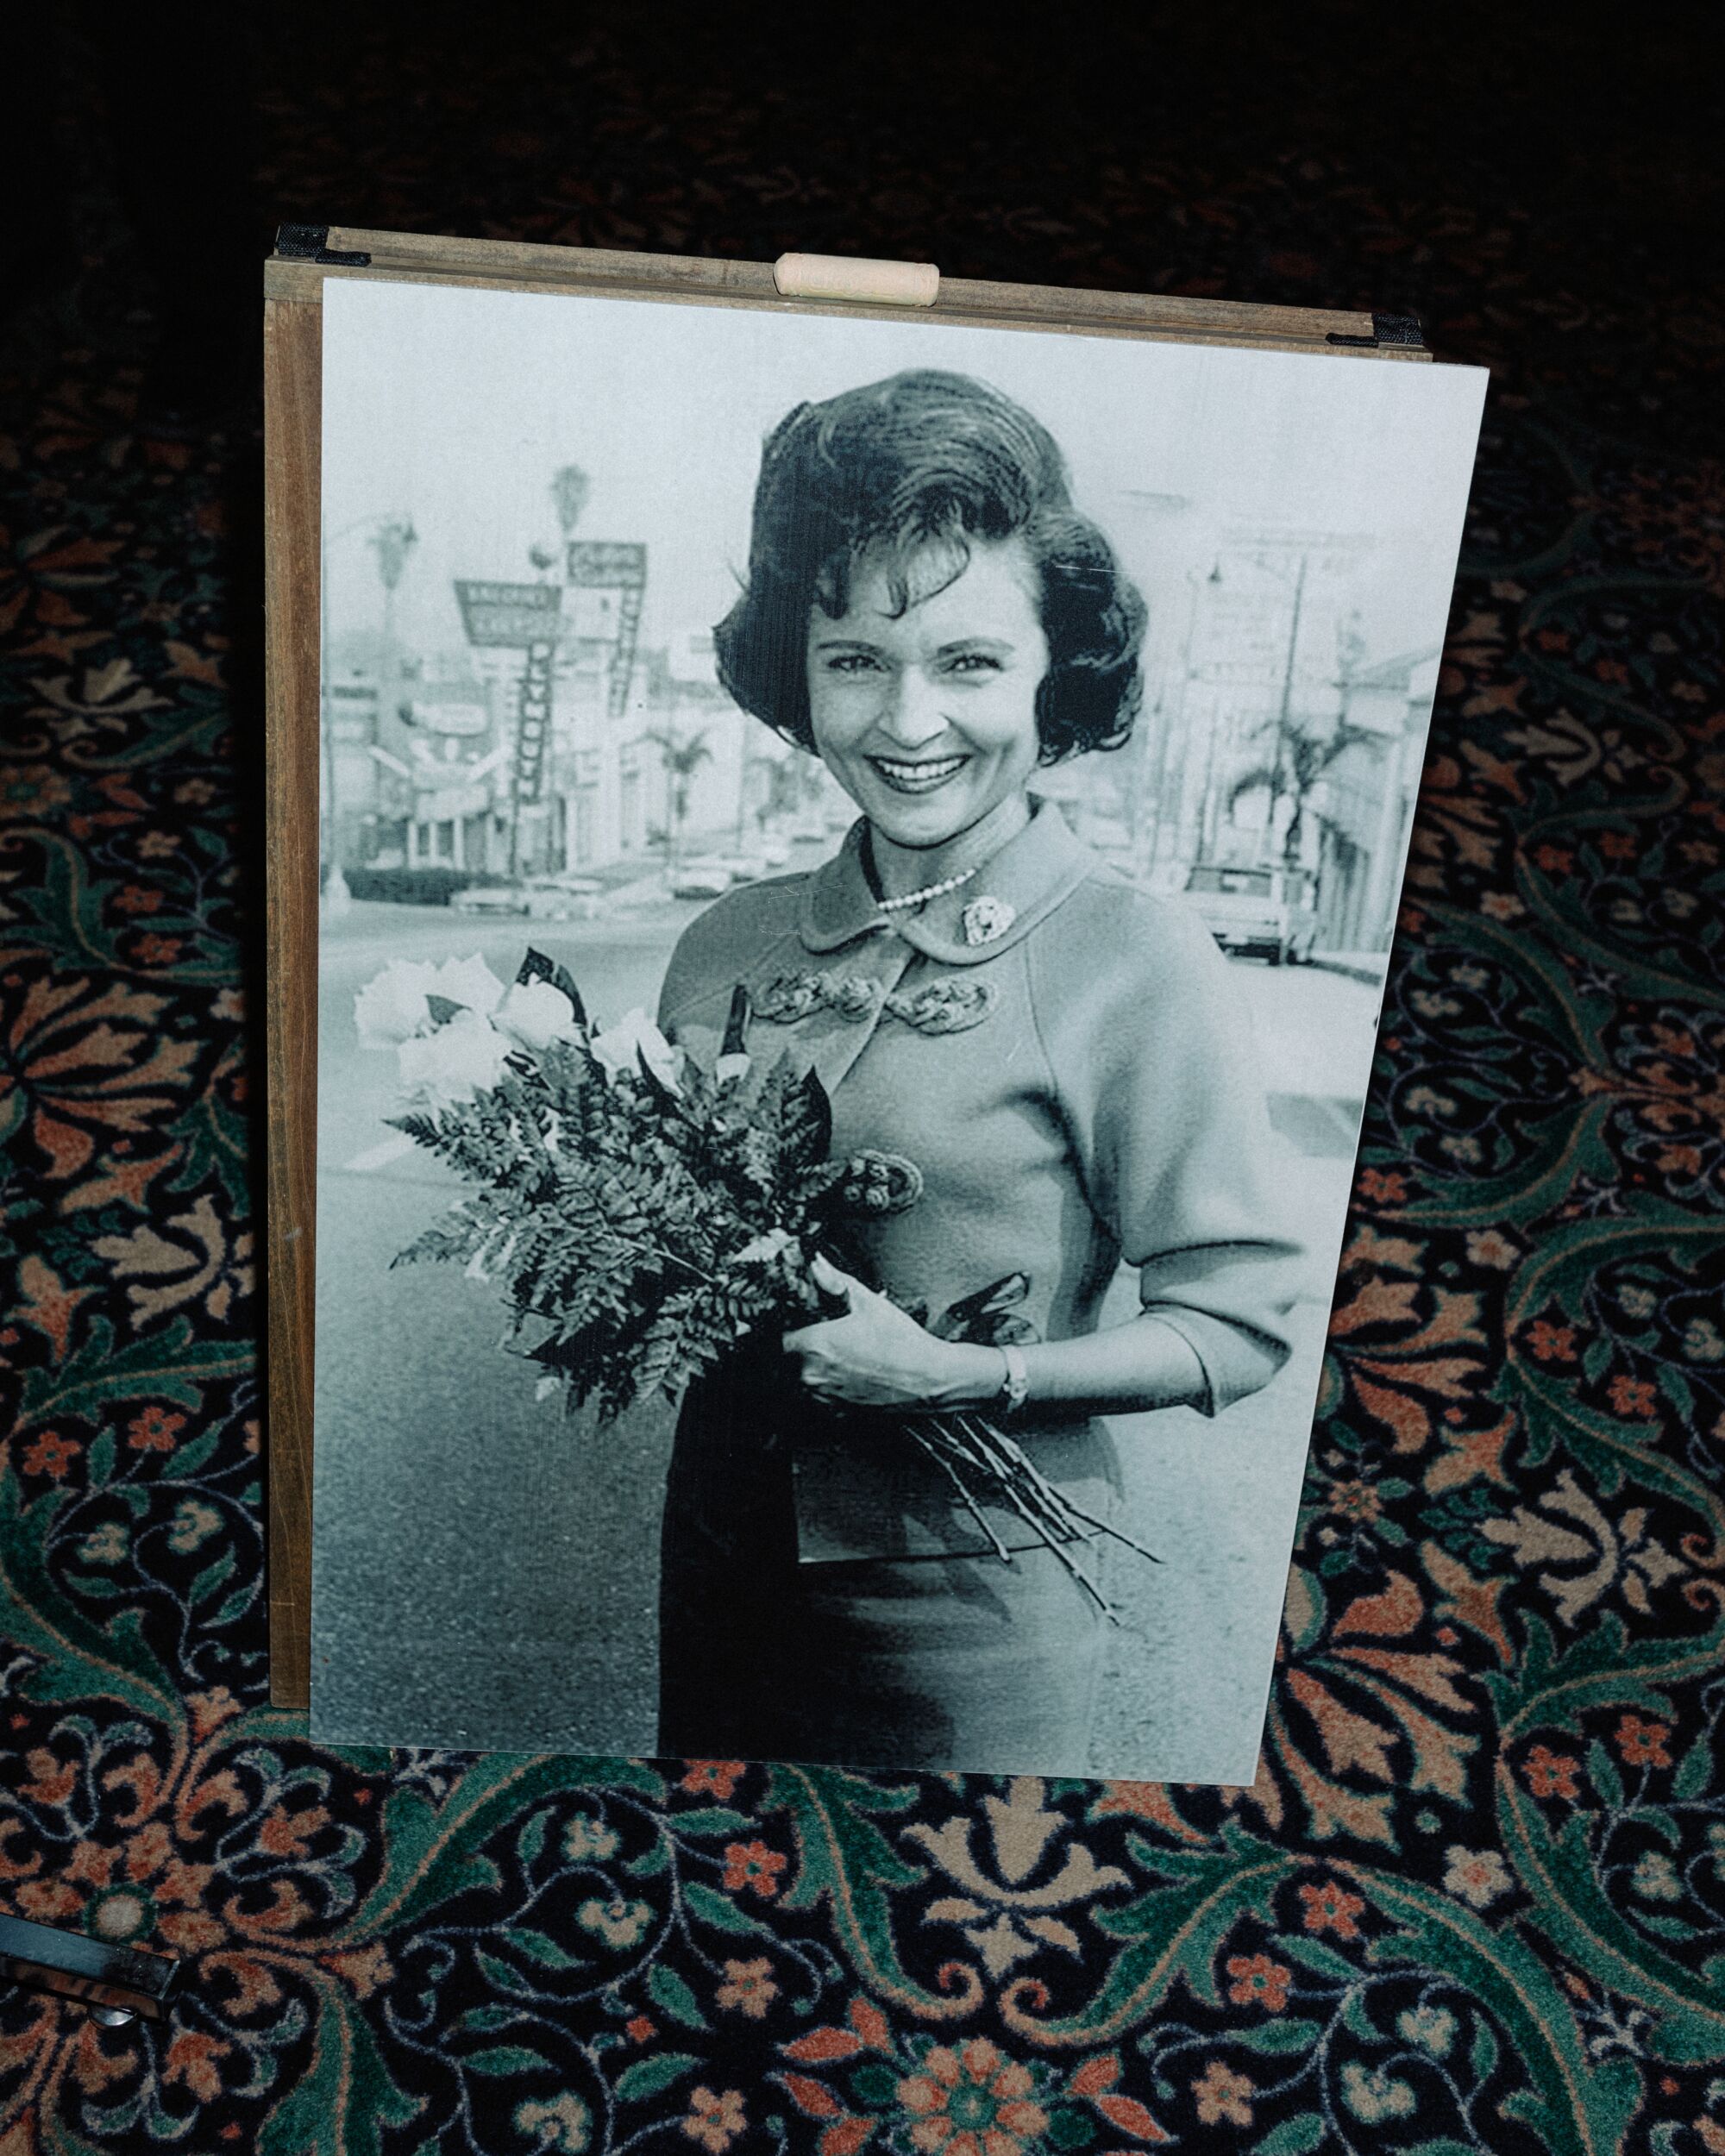 A black-and-white picture of a woman holding flowers.